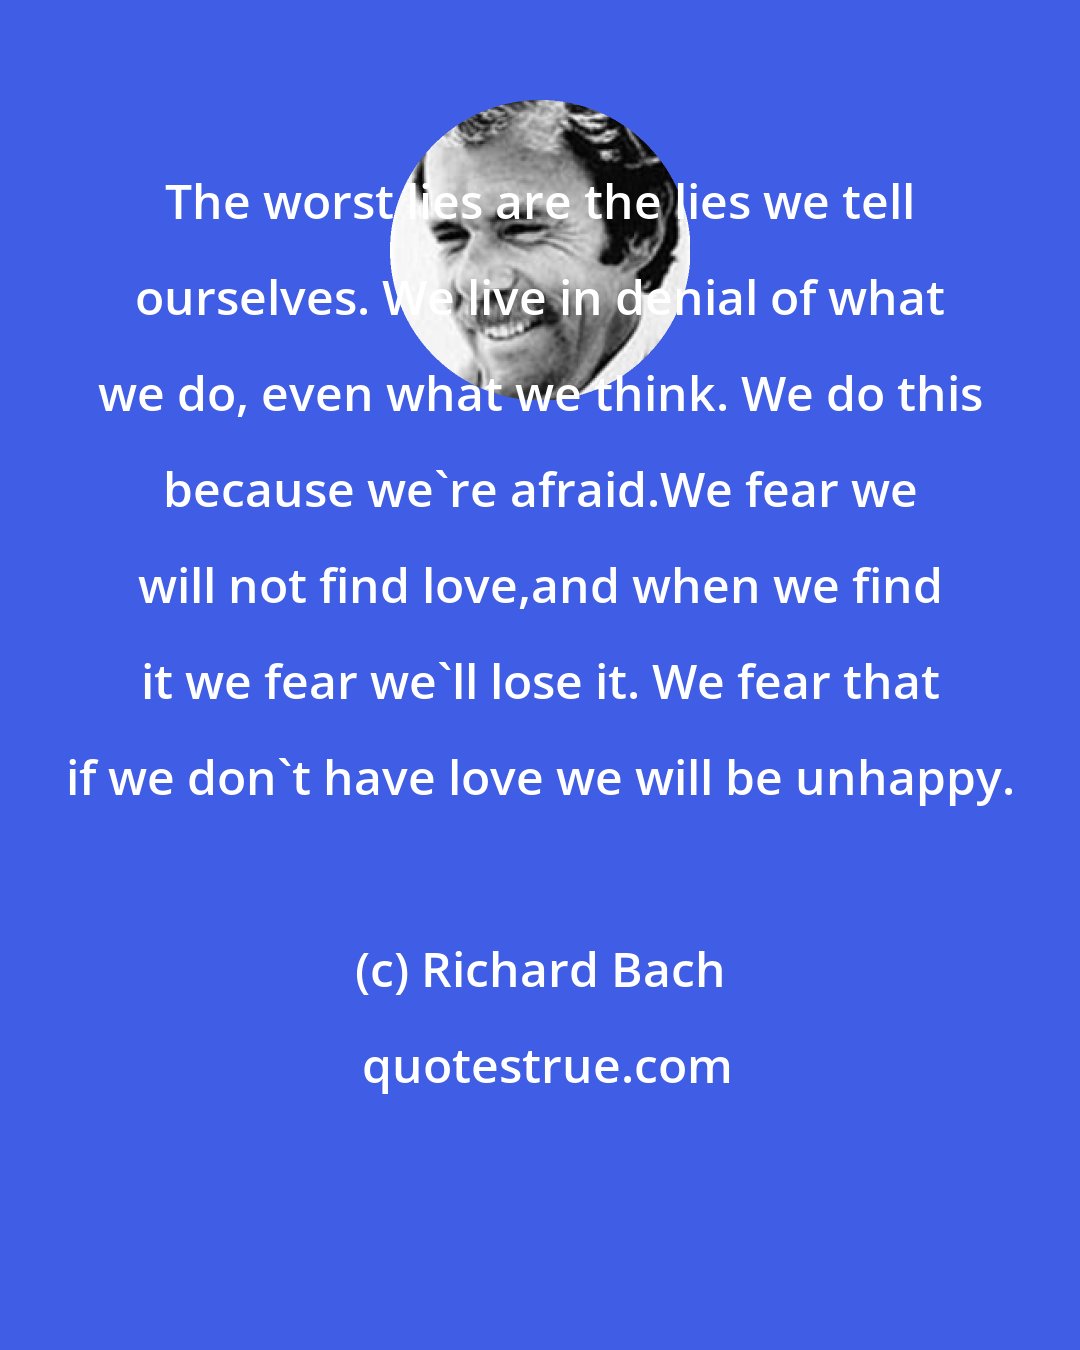 Richard Bach: The worst lies are the lies we tell ourselves. We live in denial of what we do, even what we think. We do this because we're afraid.We fear we will not find love,and when we find it we fear we'll lose it. We fear that if we don't have love we will be unhappy.